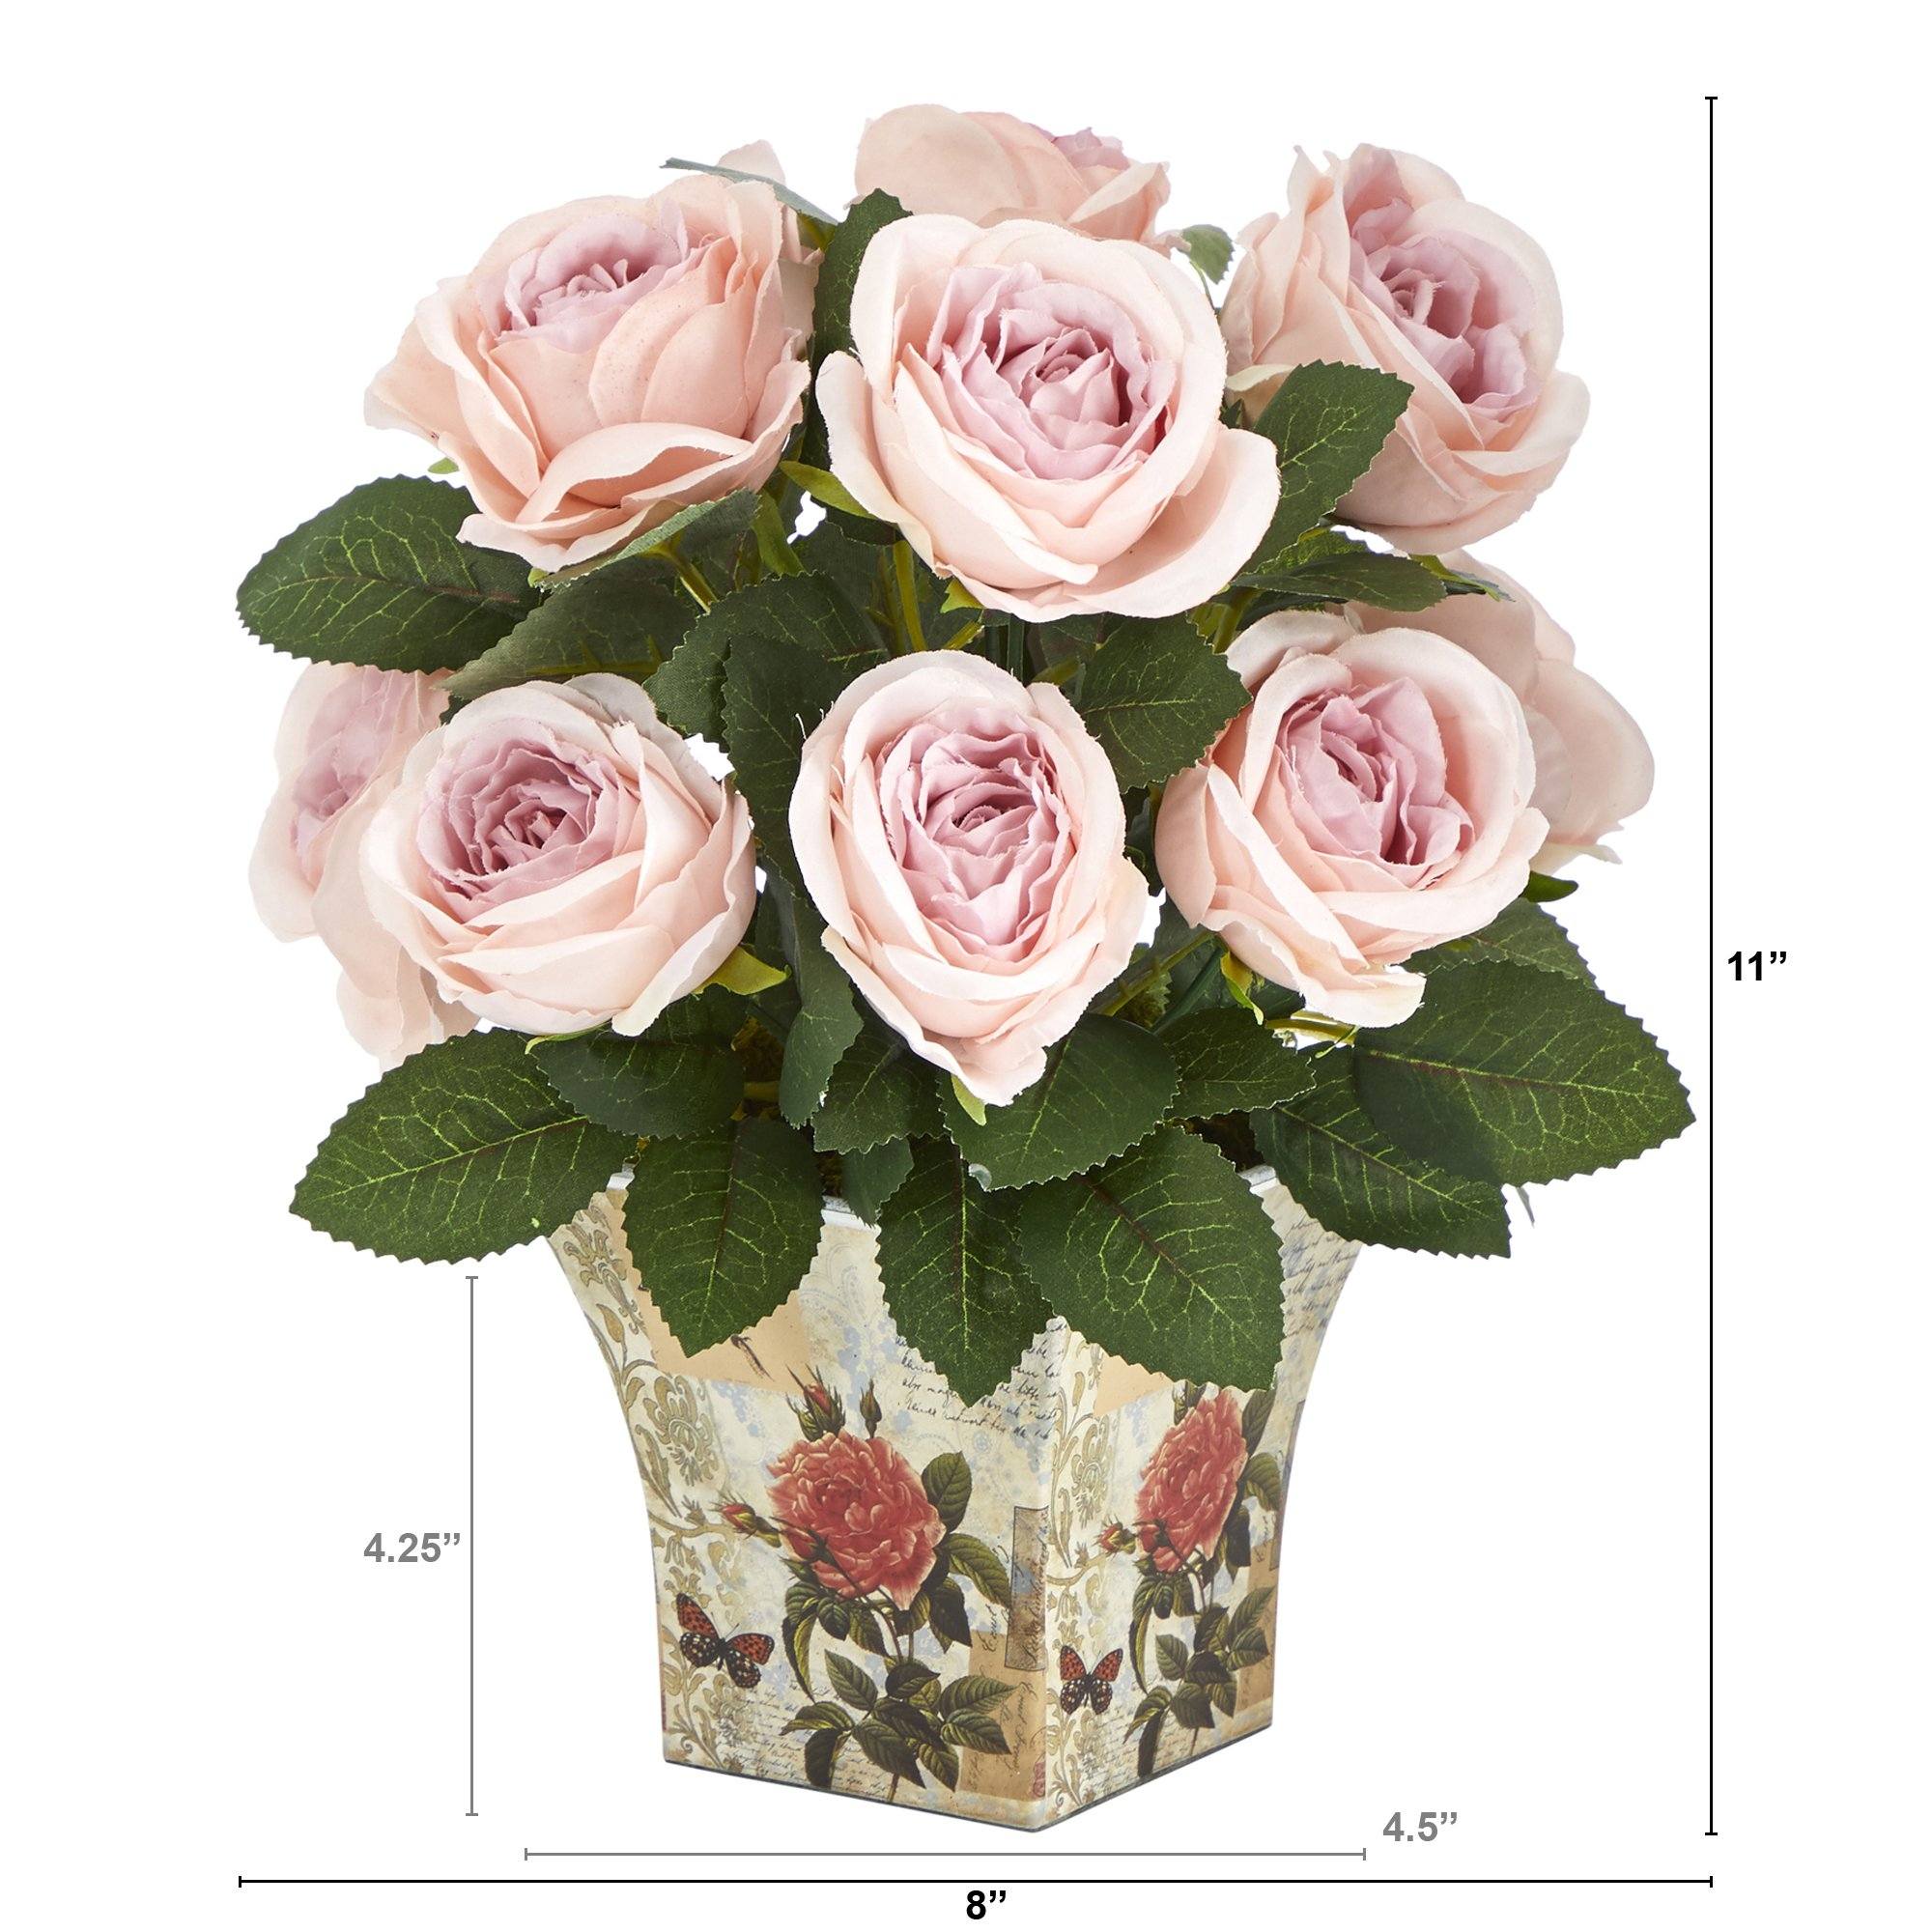 Artificial Arrangement - 11” Rose in Floral Vase by Nearly Natural